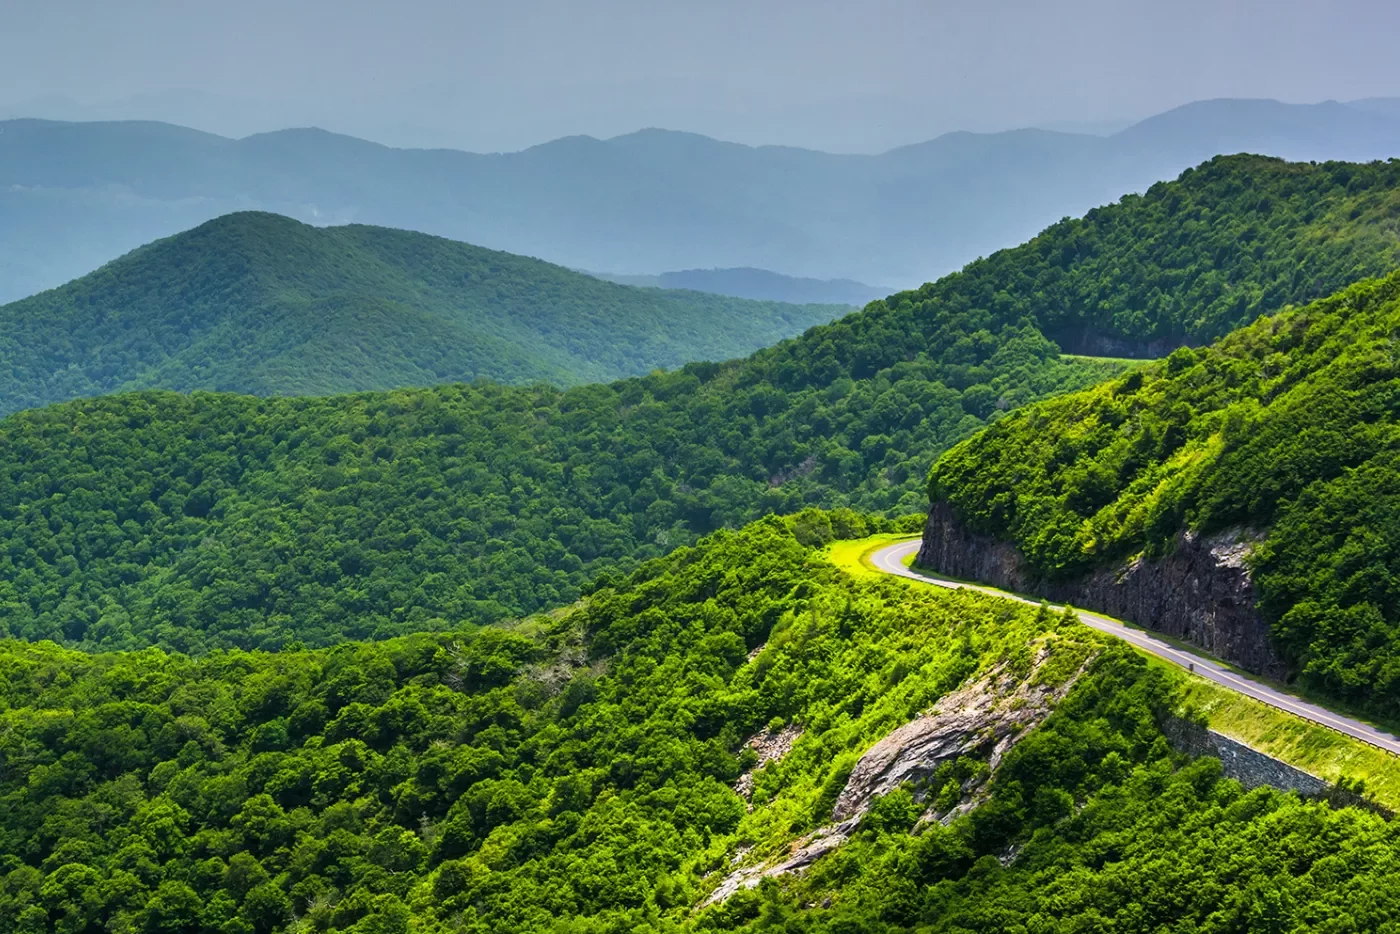 Wide shot of mountain road, overlooking large forested mountains.